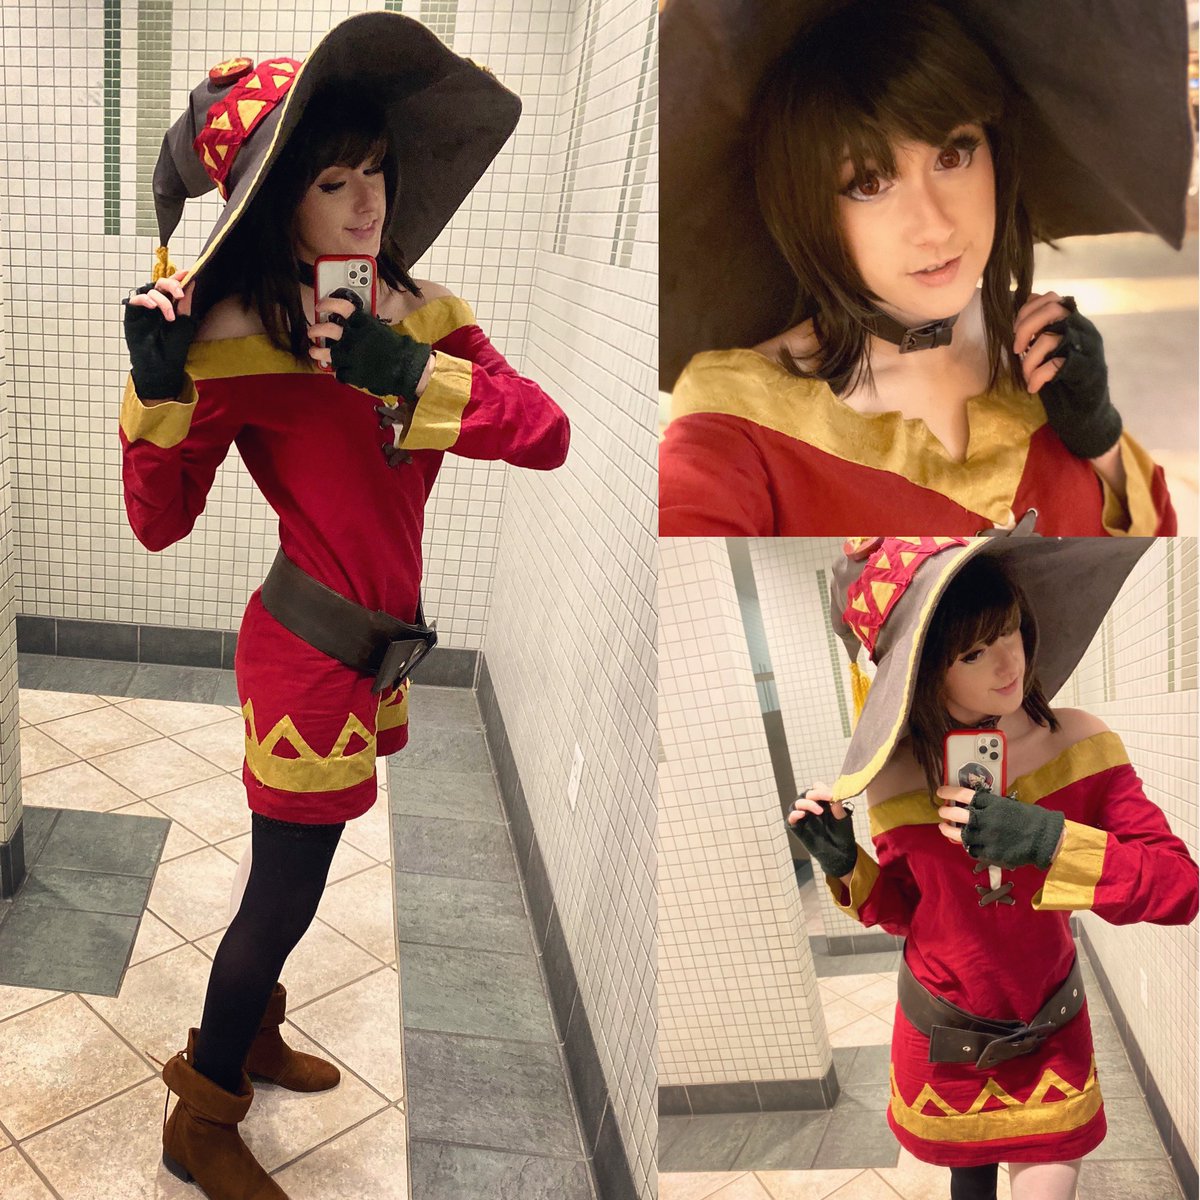 Konosuba movie comes out today!!  So hosting a movie meetup at Tysons Corner as Megumin 😊
.
#megumin #megumincosplay #tysonscorner #konosuba #konosubacosplay